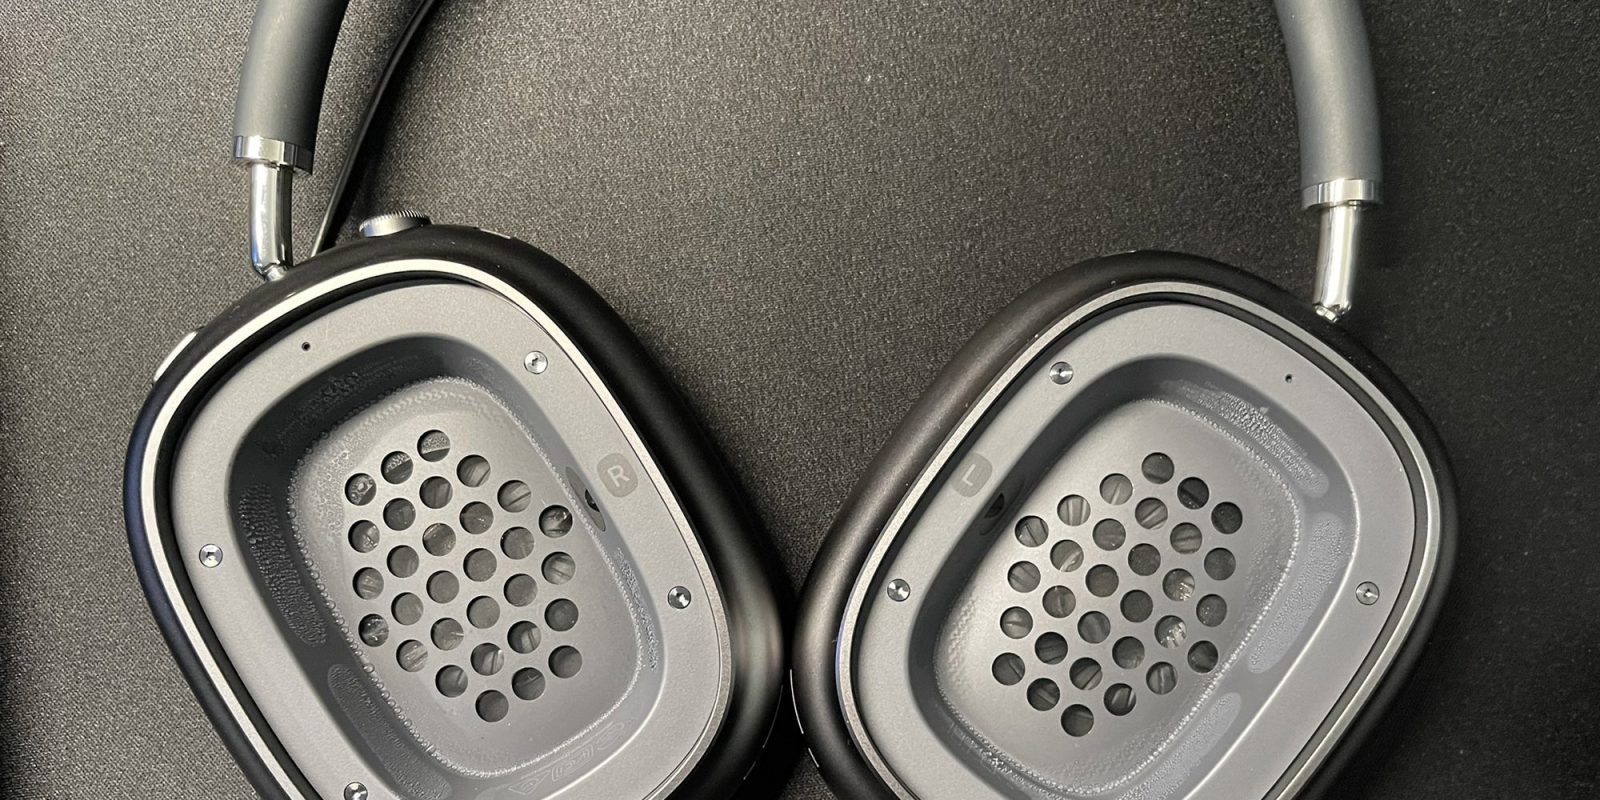 Airpods max owners still complain about condensation issues inside ear